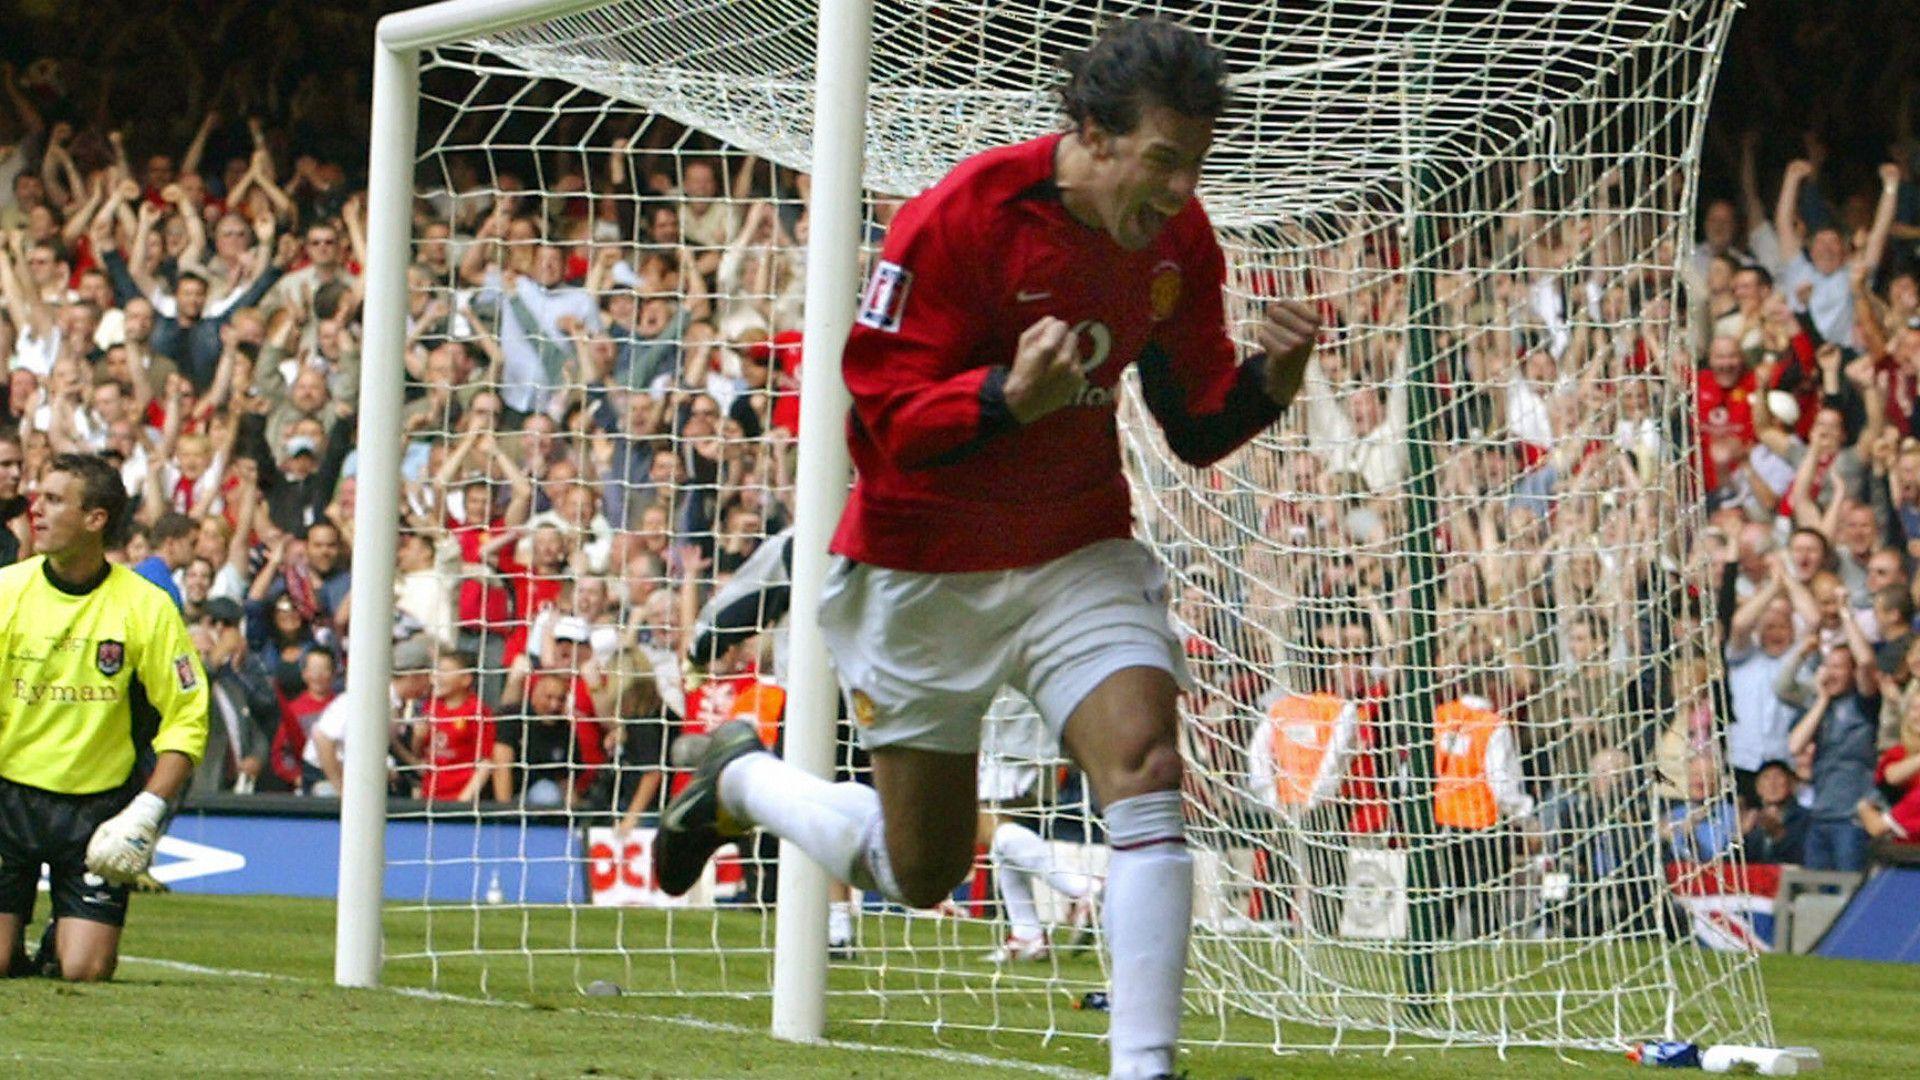 The real Man Utd is back and it's great to see Nistelrooy